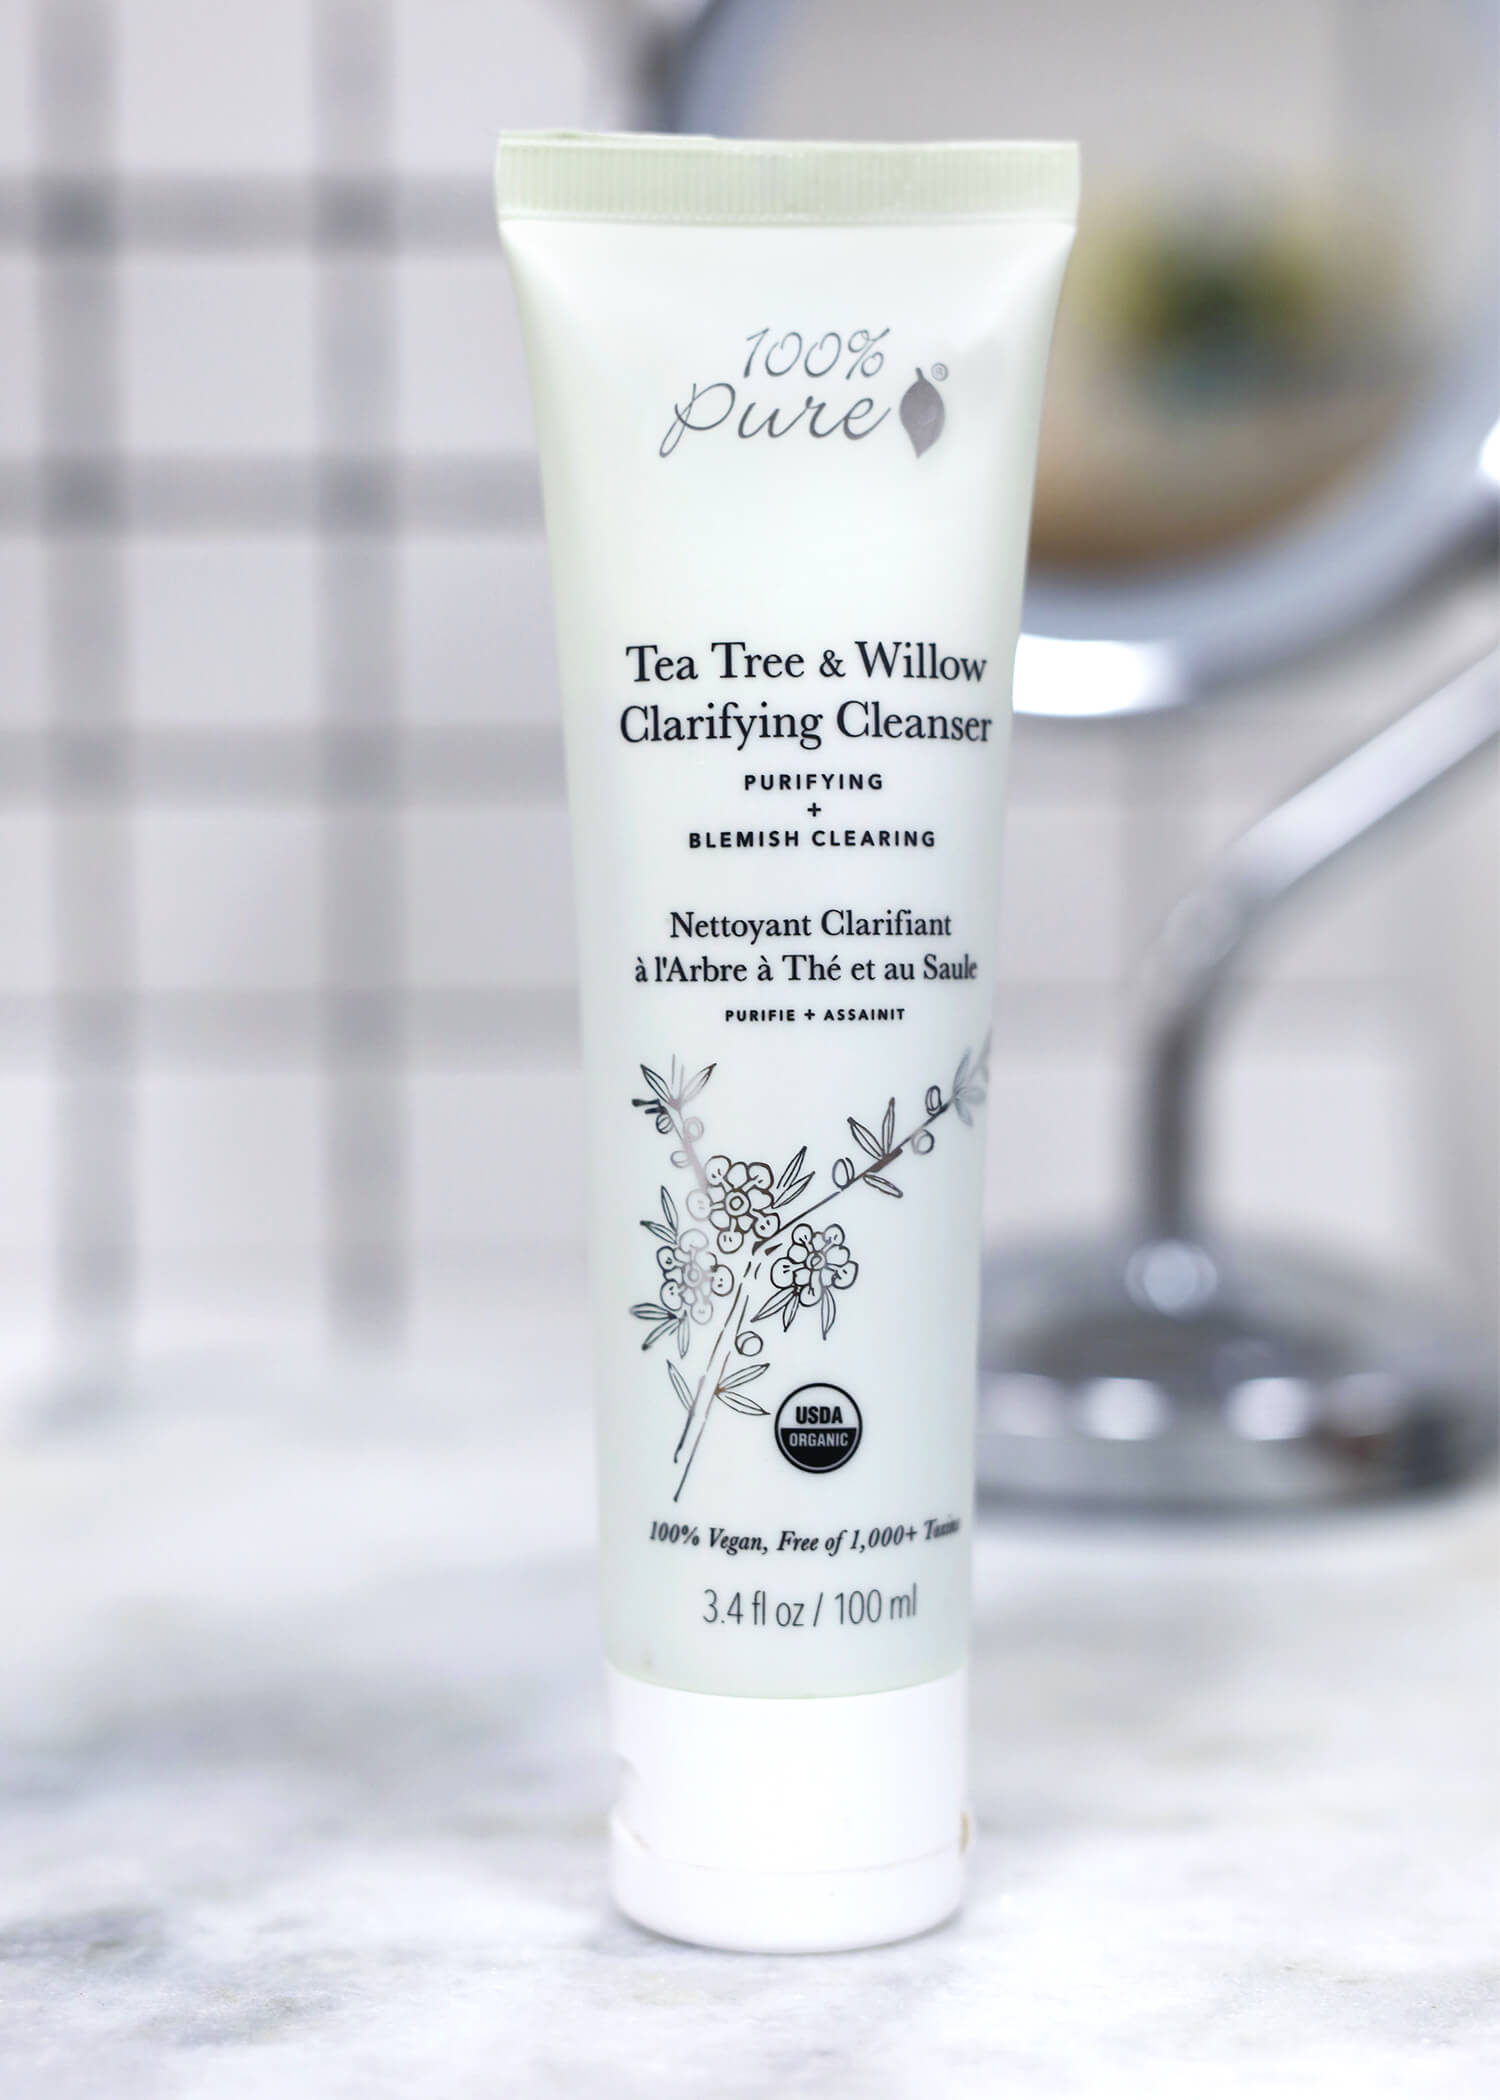 100% PURE Tea Tree & Willow Clarifying Cleanser